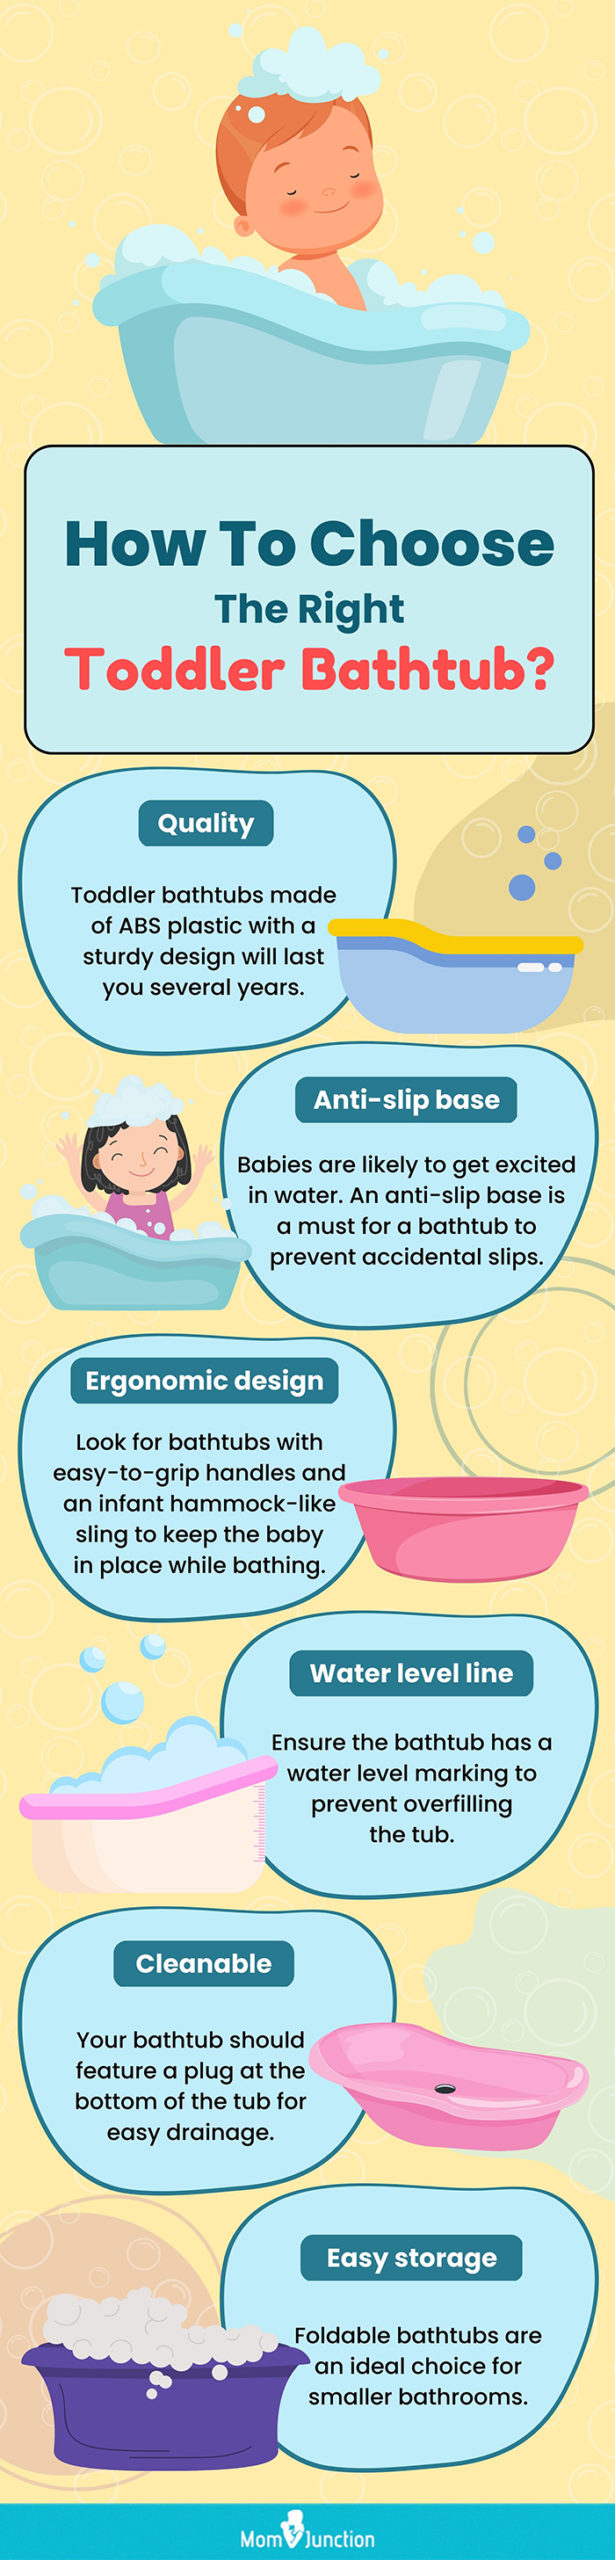 How To Choose The Right Toddler Bathtub (infographic)